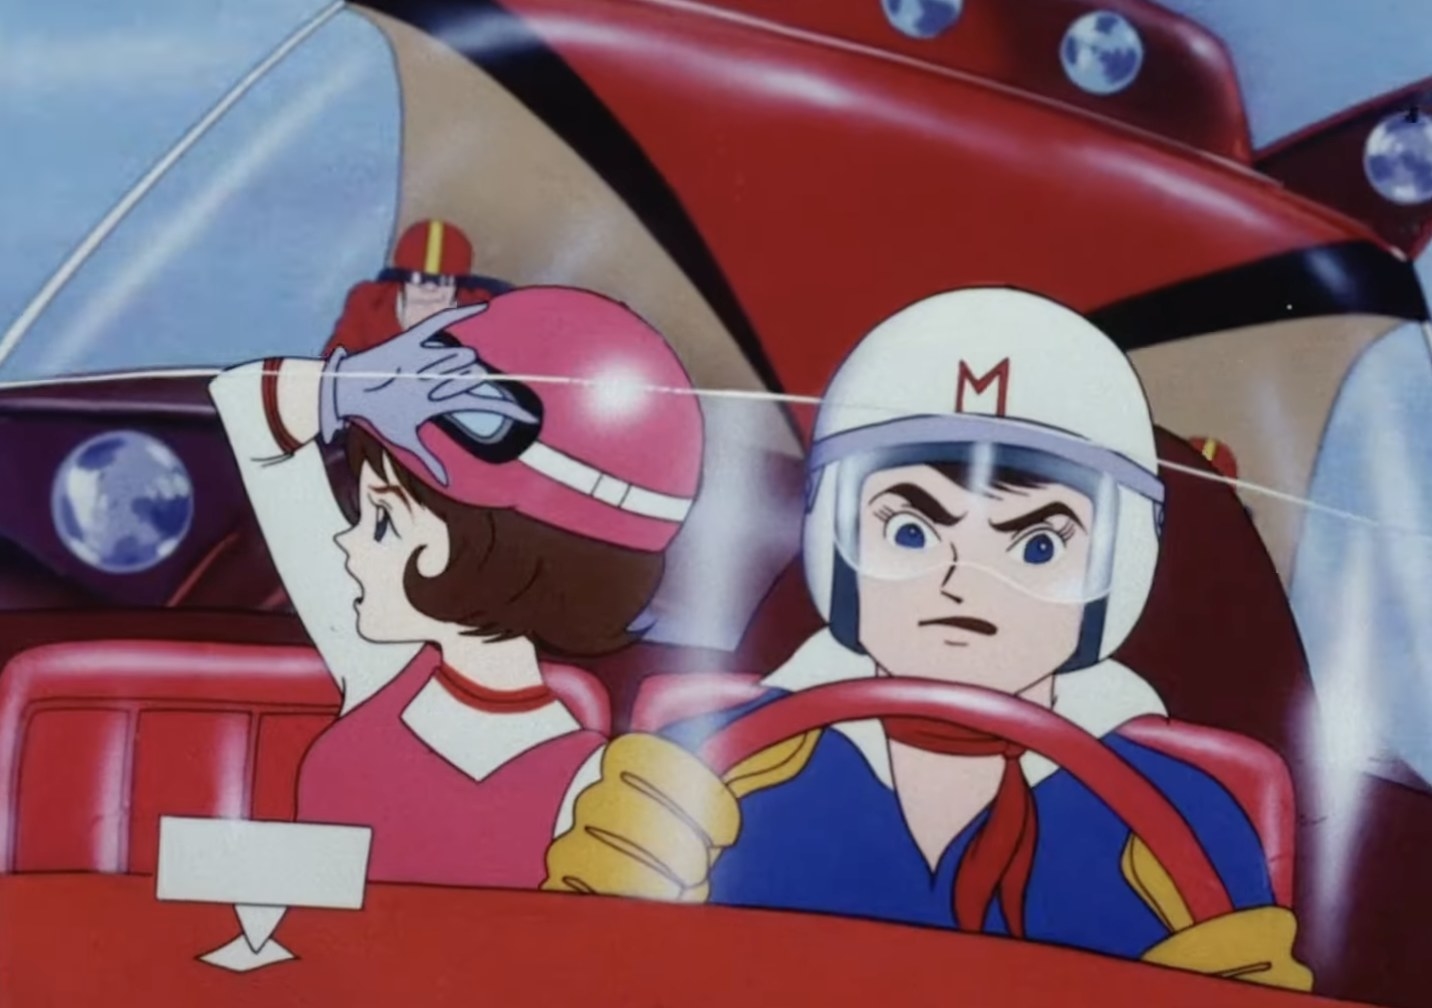 Trixie and Speed Racer animated